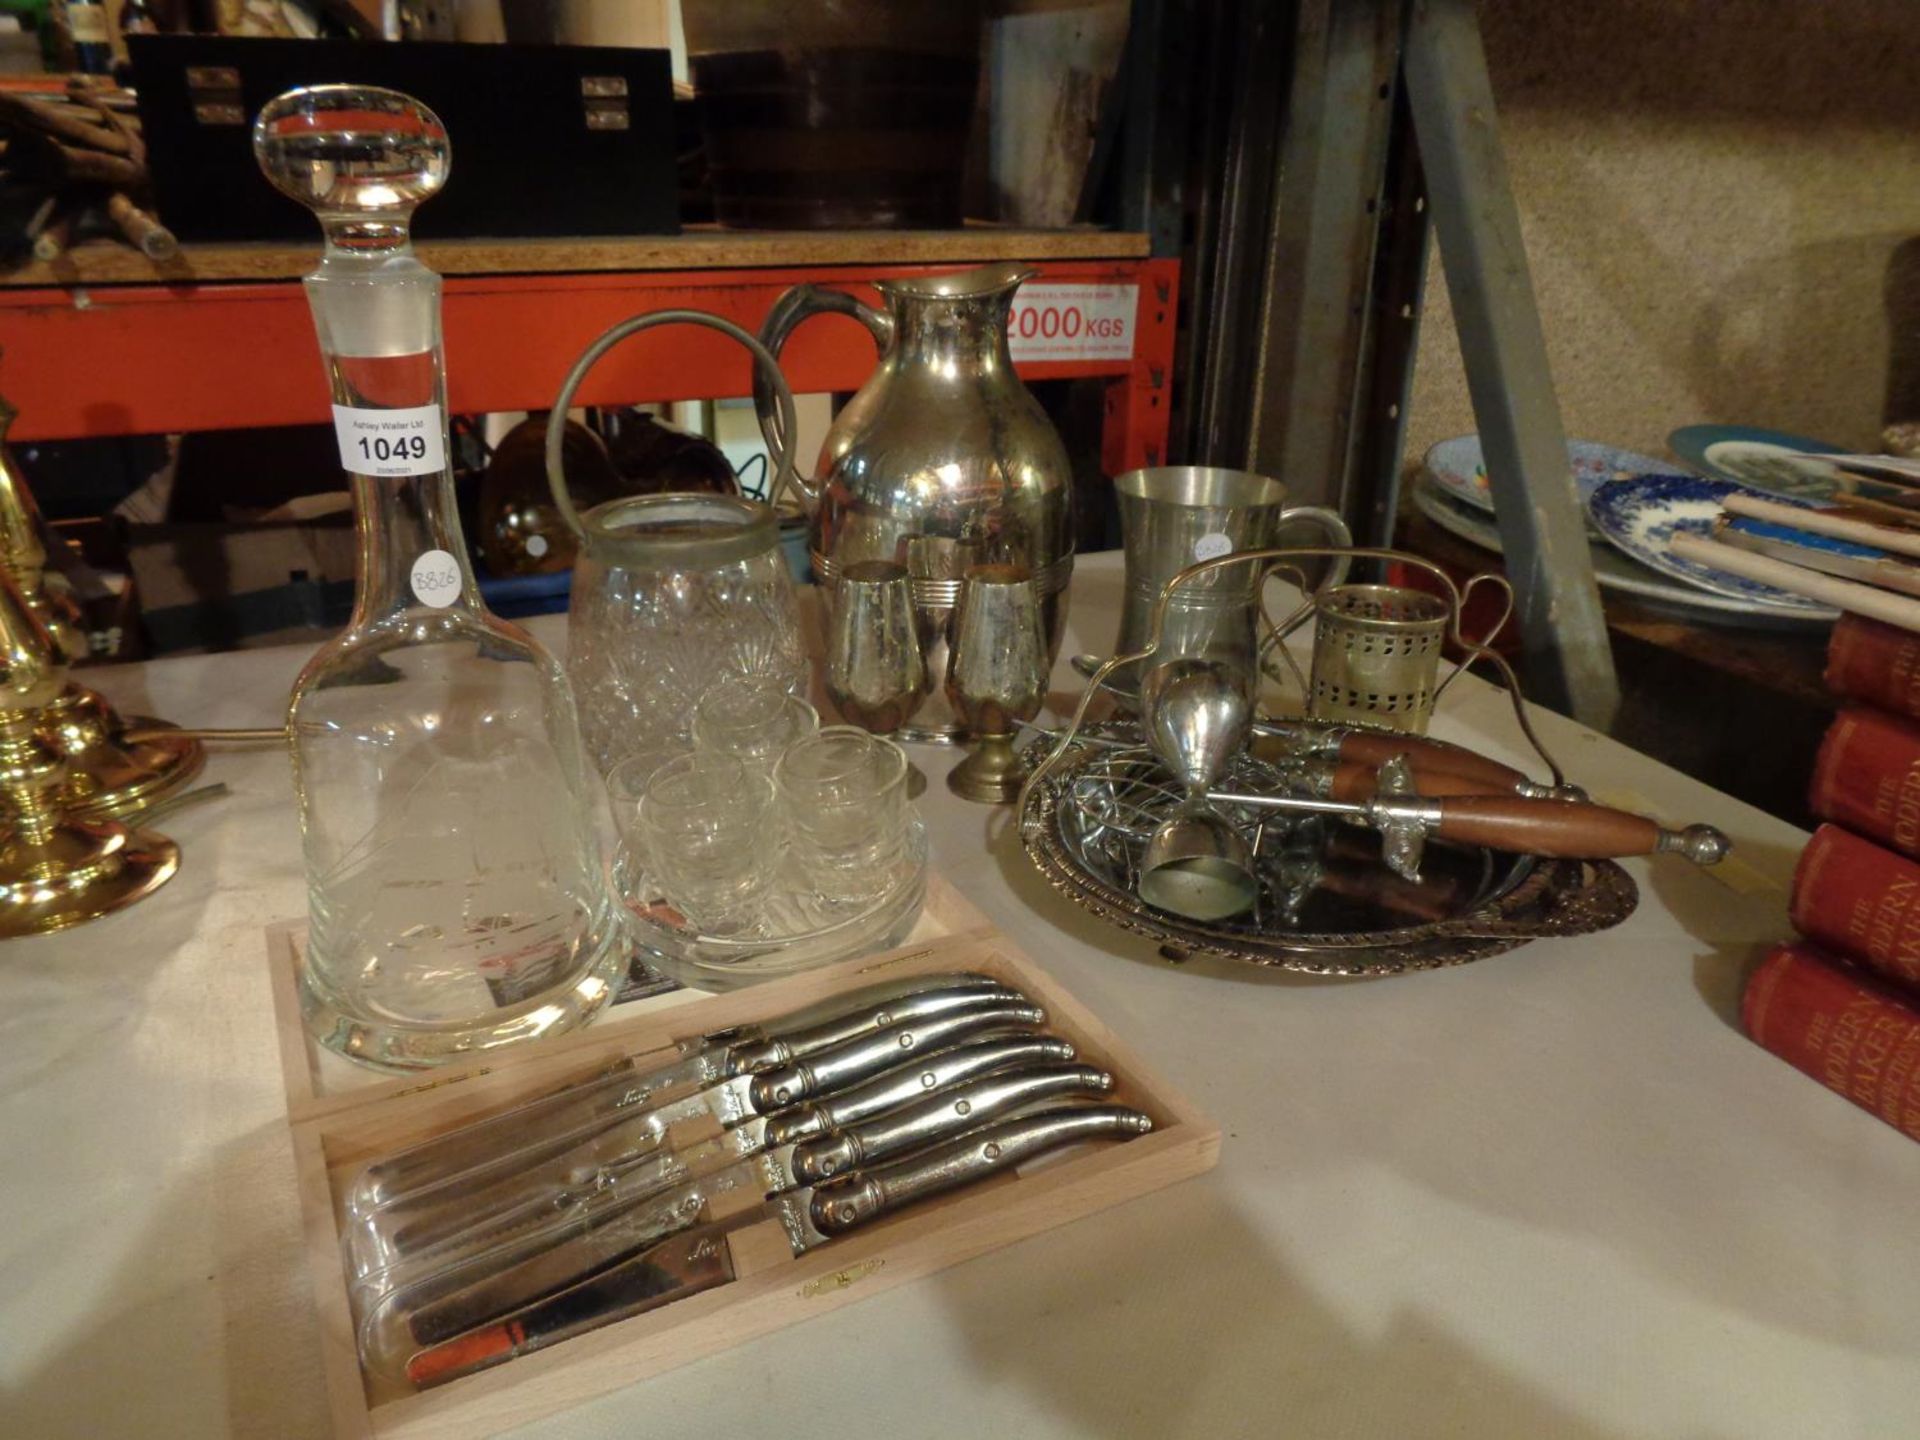 AN ASSORTMENT OF WHITE METAL ITEMS TO INCLUDE A CAKE STAND AND A SHIP THEMED DECANTER